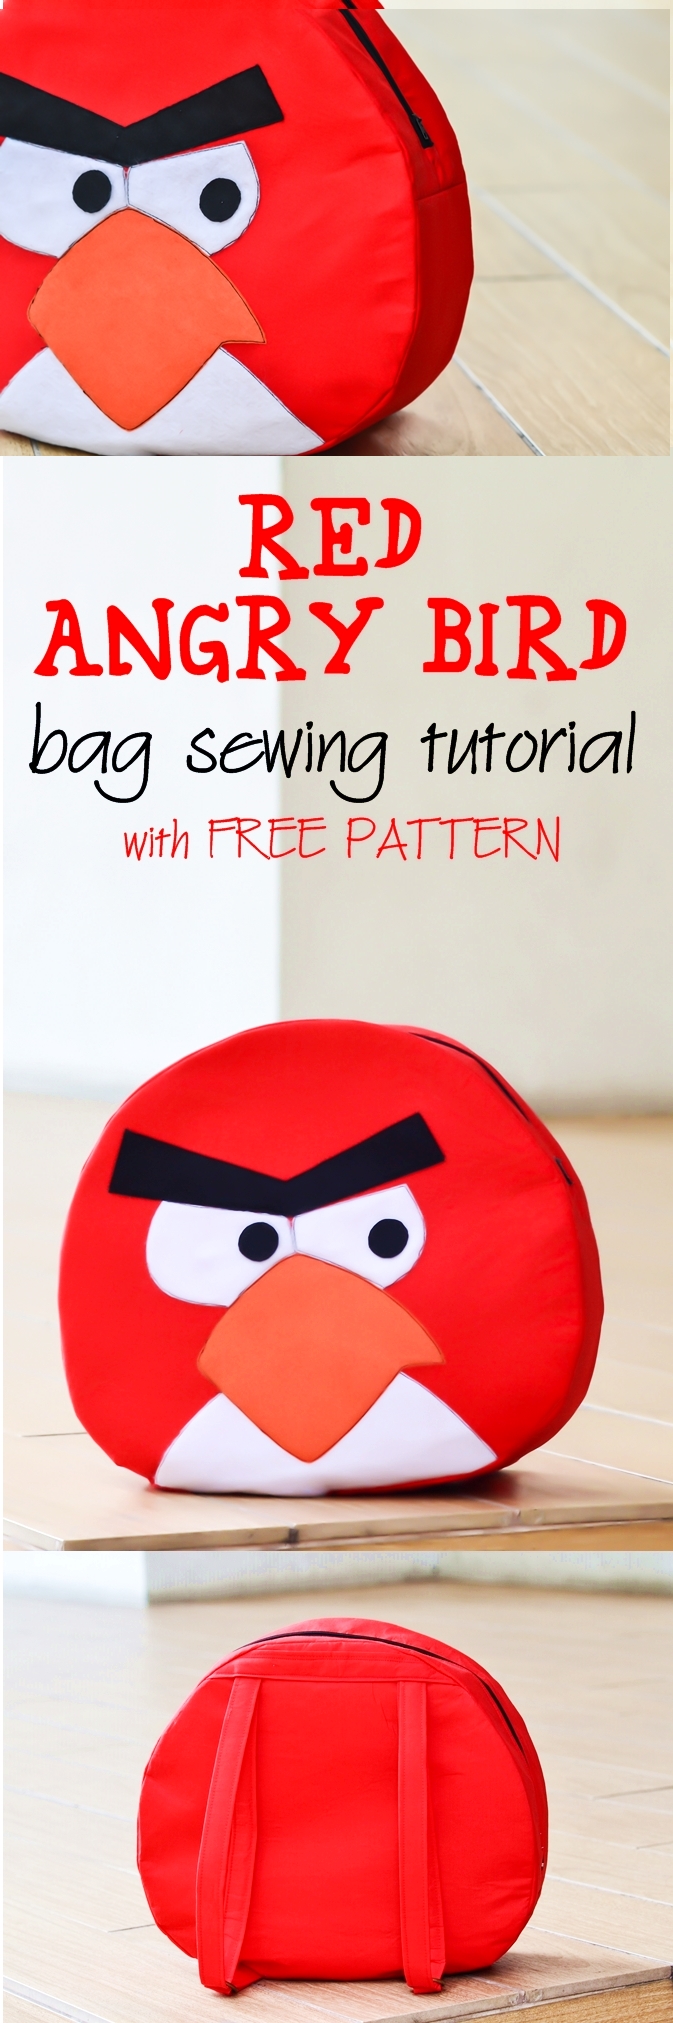 How-to-make-Angry-Birds-Bag-with-FREE-PATTERN-on-sewsomestuff.com_